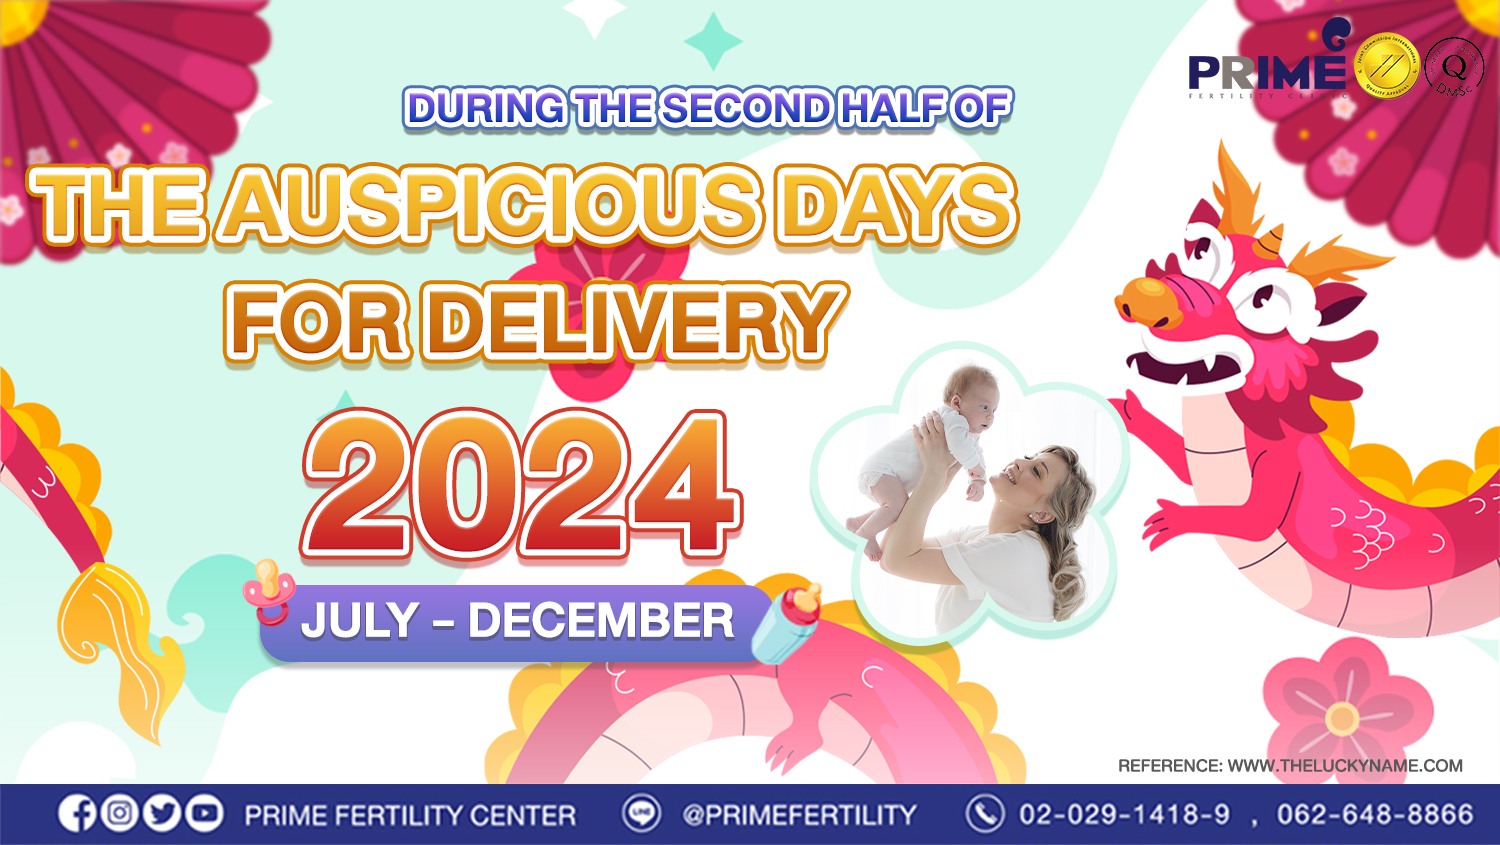 The auspicious days for delivery during the second half of Dragon year